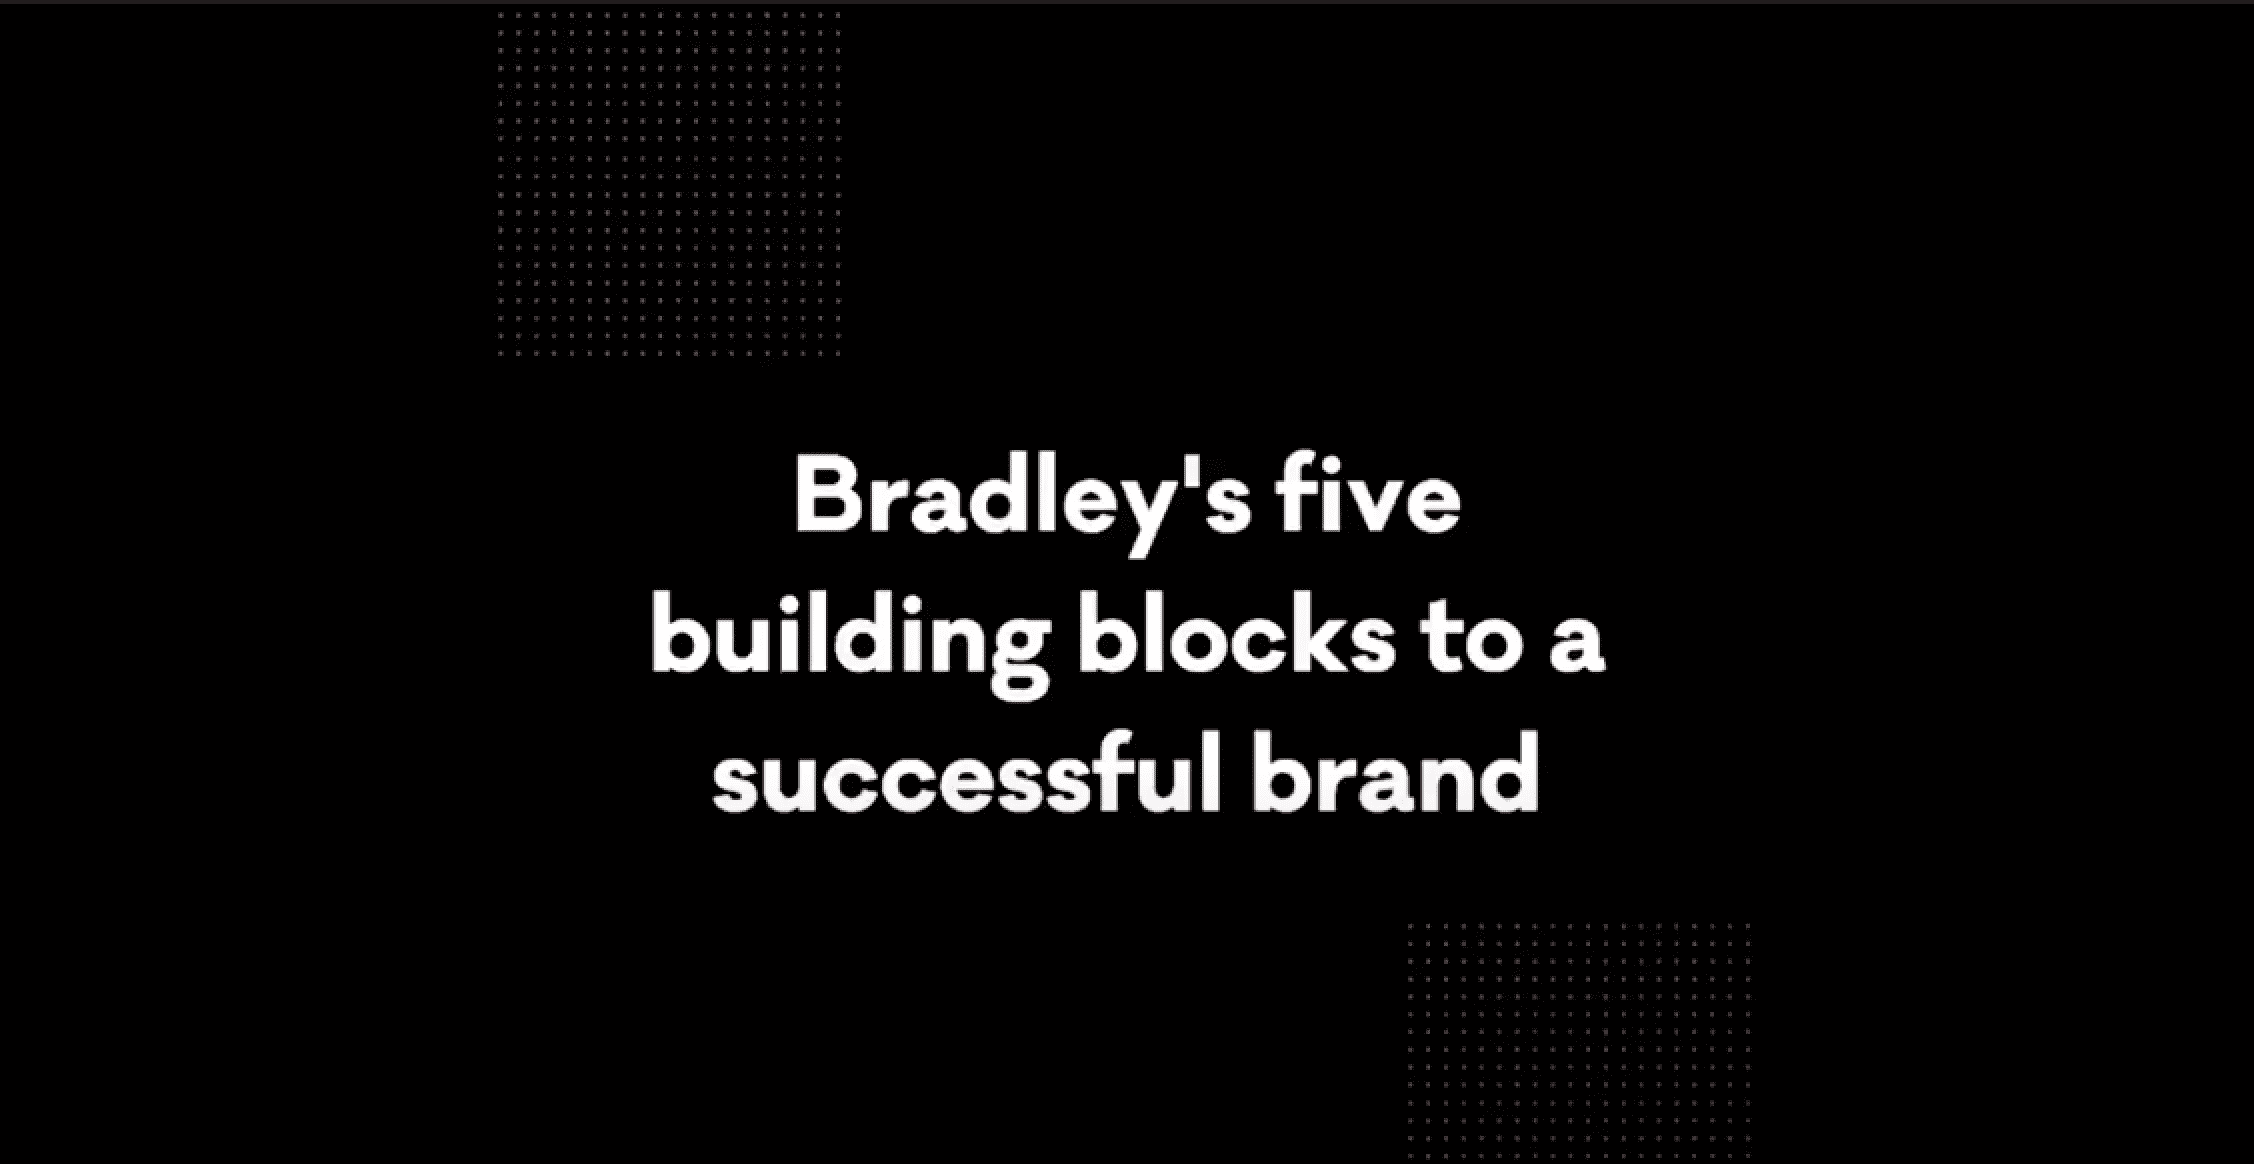 The opening sequence of the video is captured here with Bradley’s 5 Building Blocks of a Successful Brand in the middle of a black screen with some red dots signifying the Bradley branding.